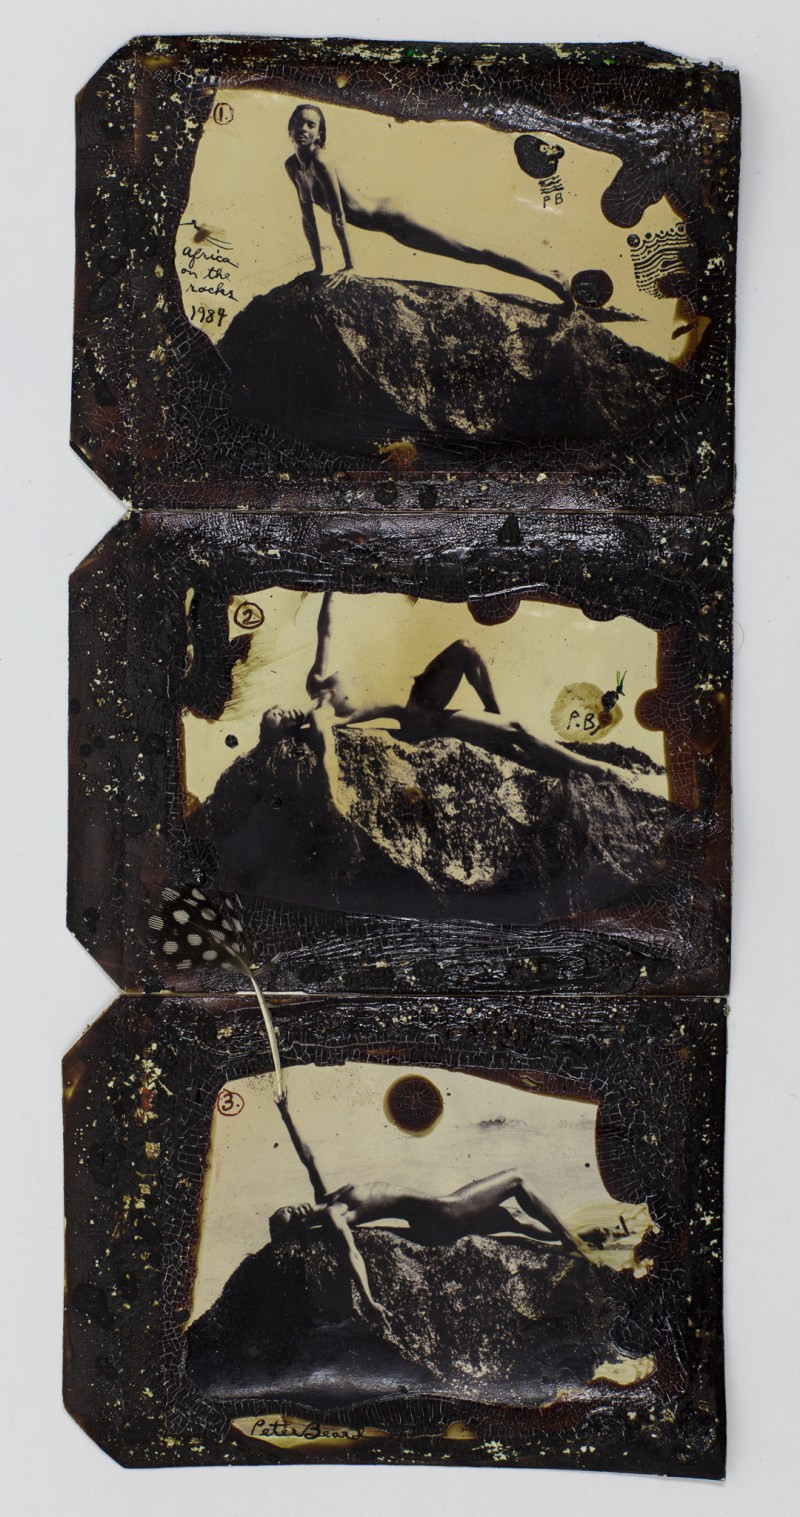 Africa On the Rocks (triptych) (1984 / 2002)